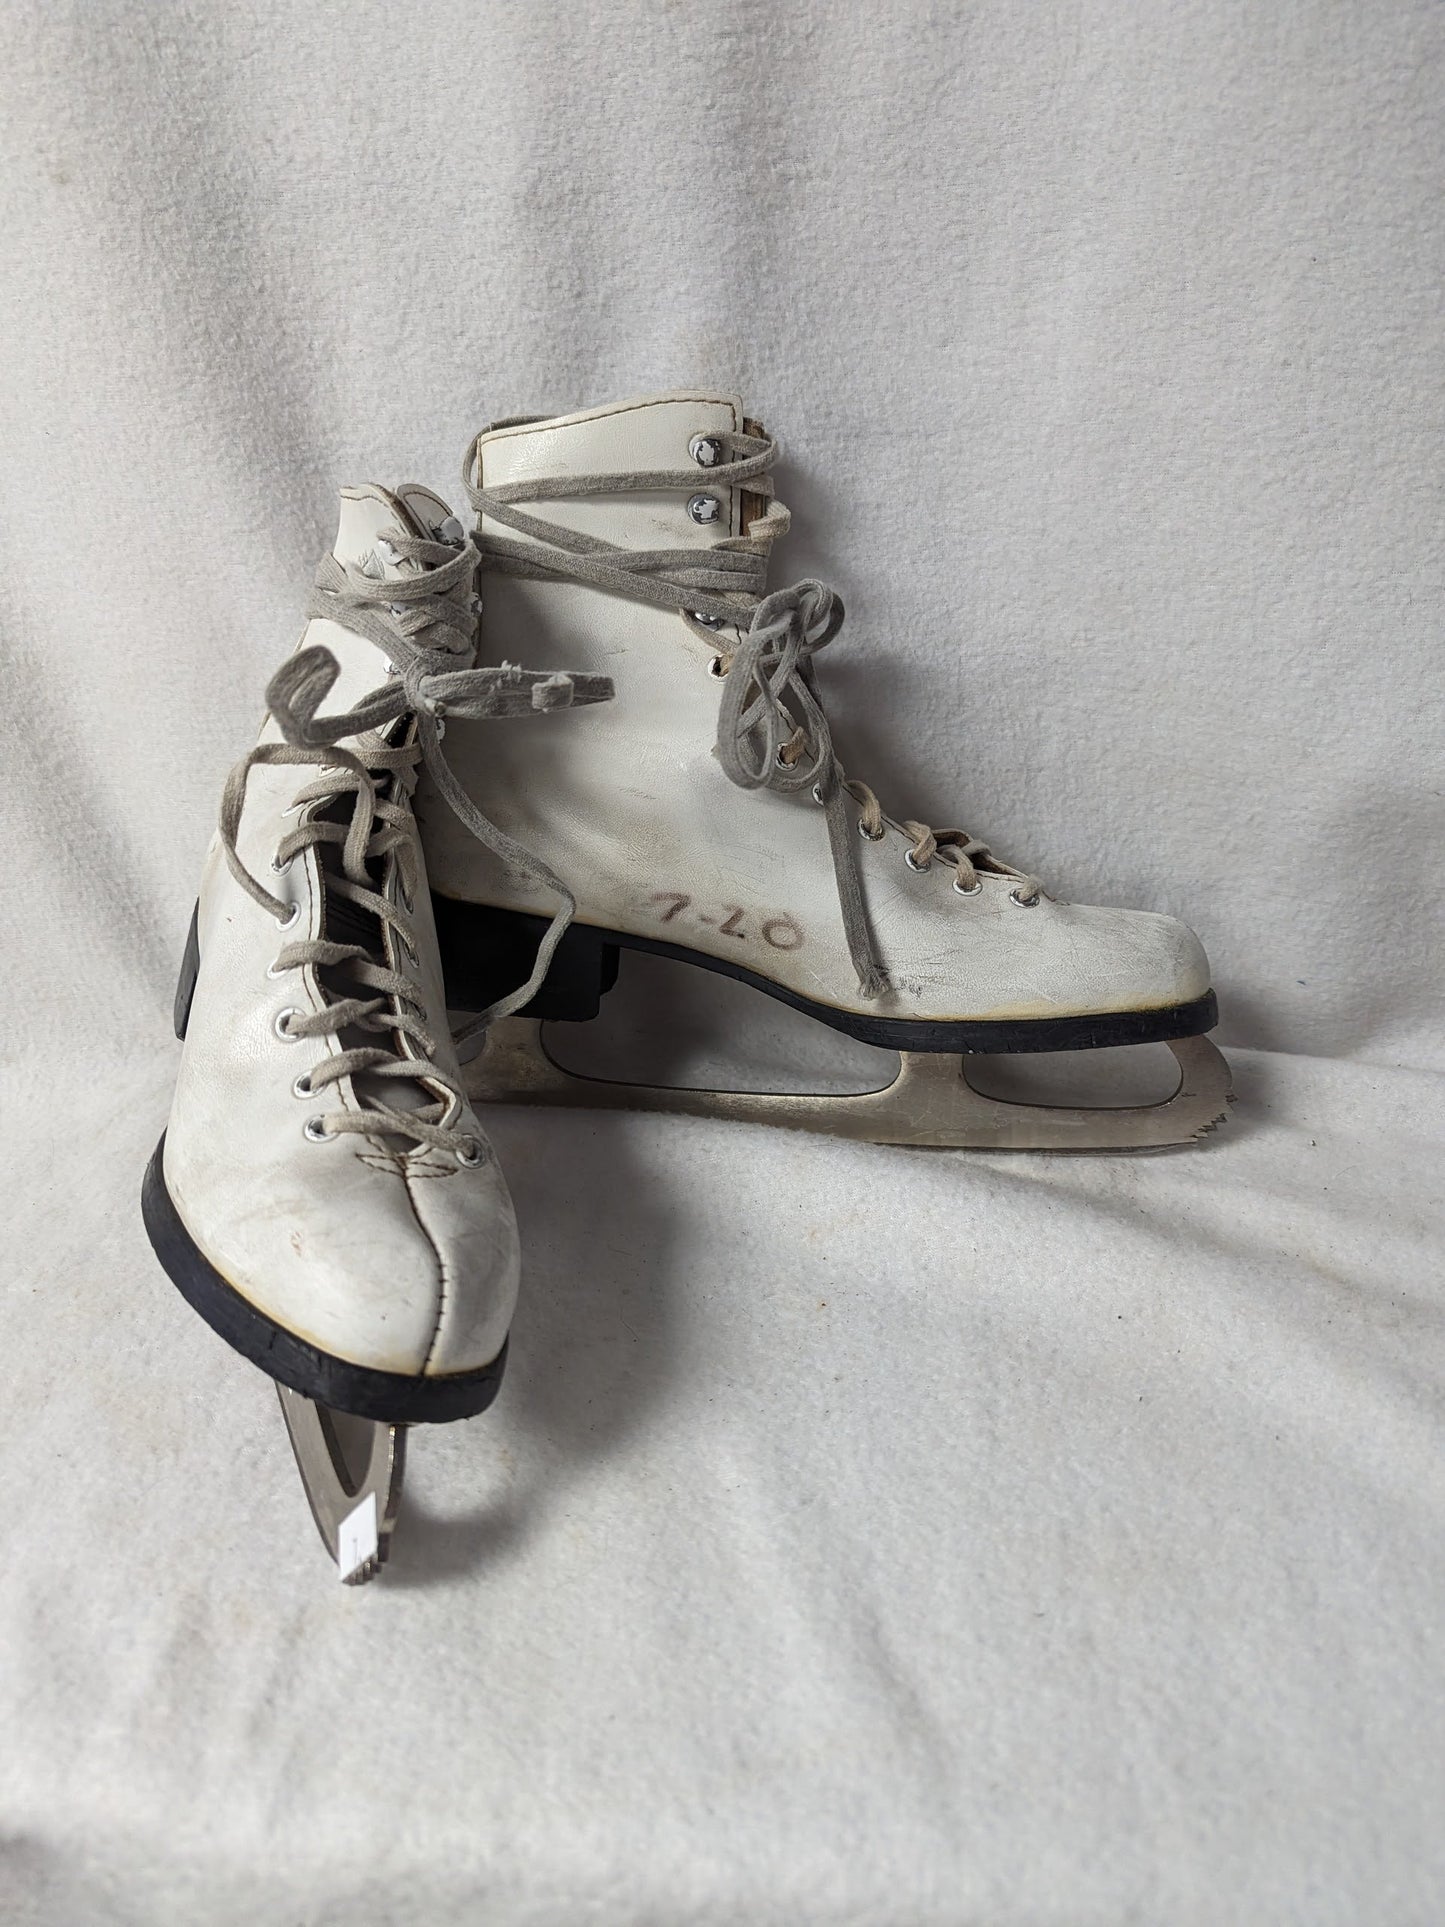 Figure Ice Skates Size 13 Color White Condition Used